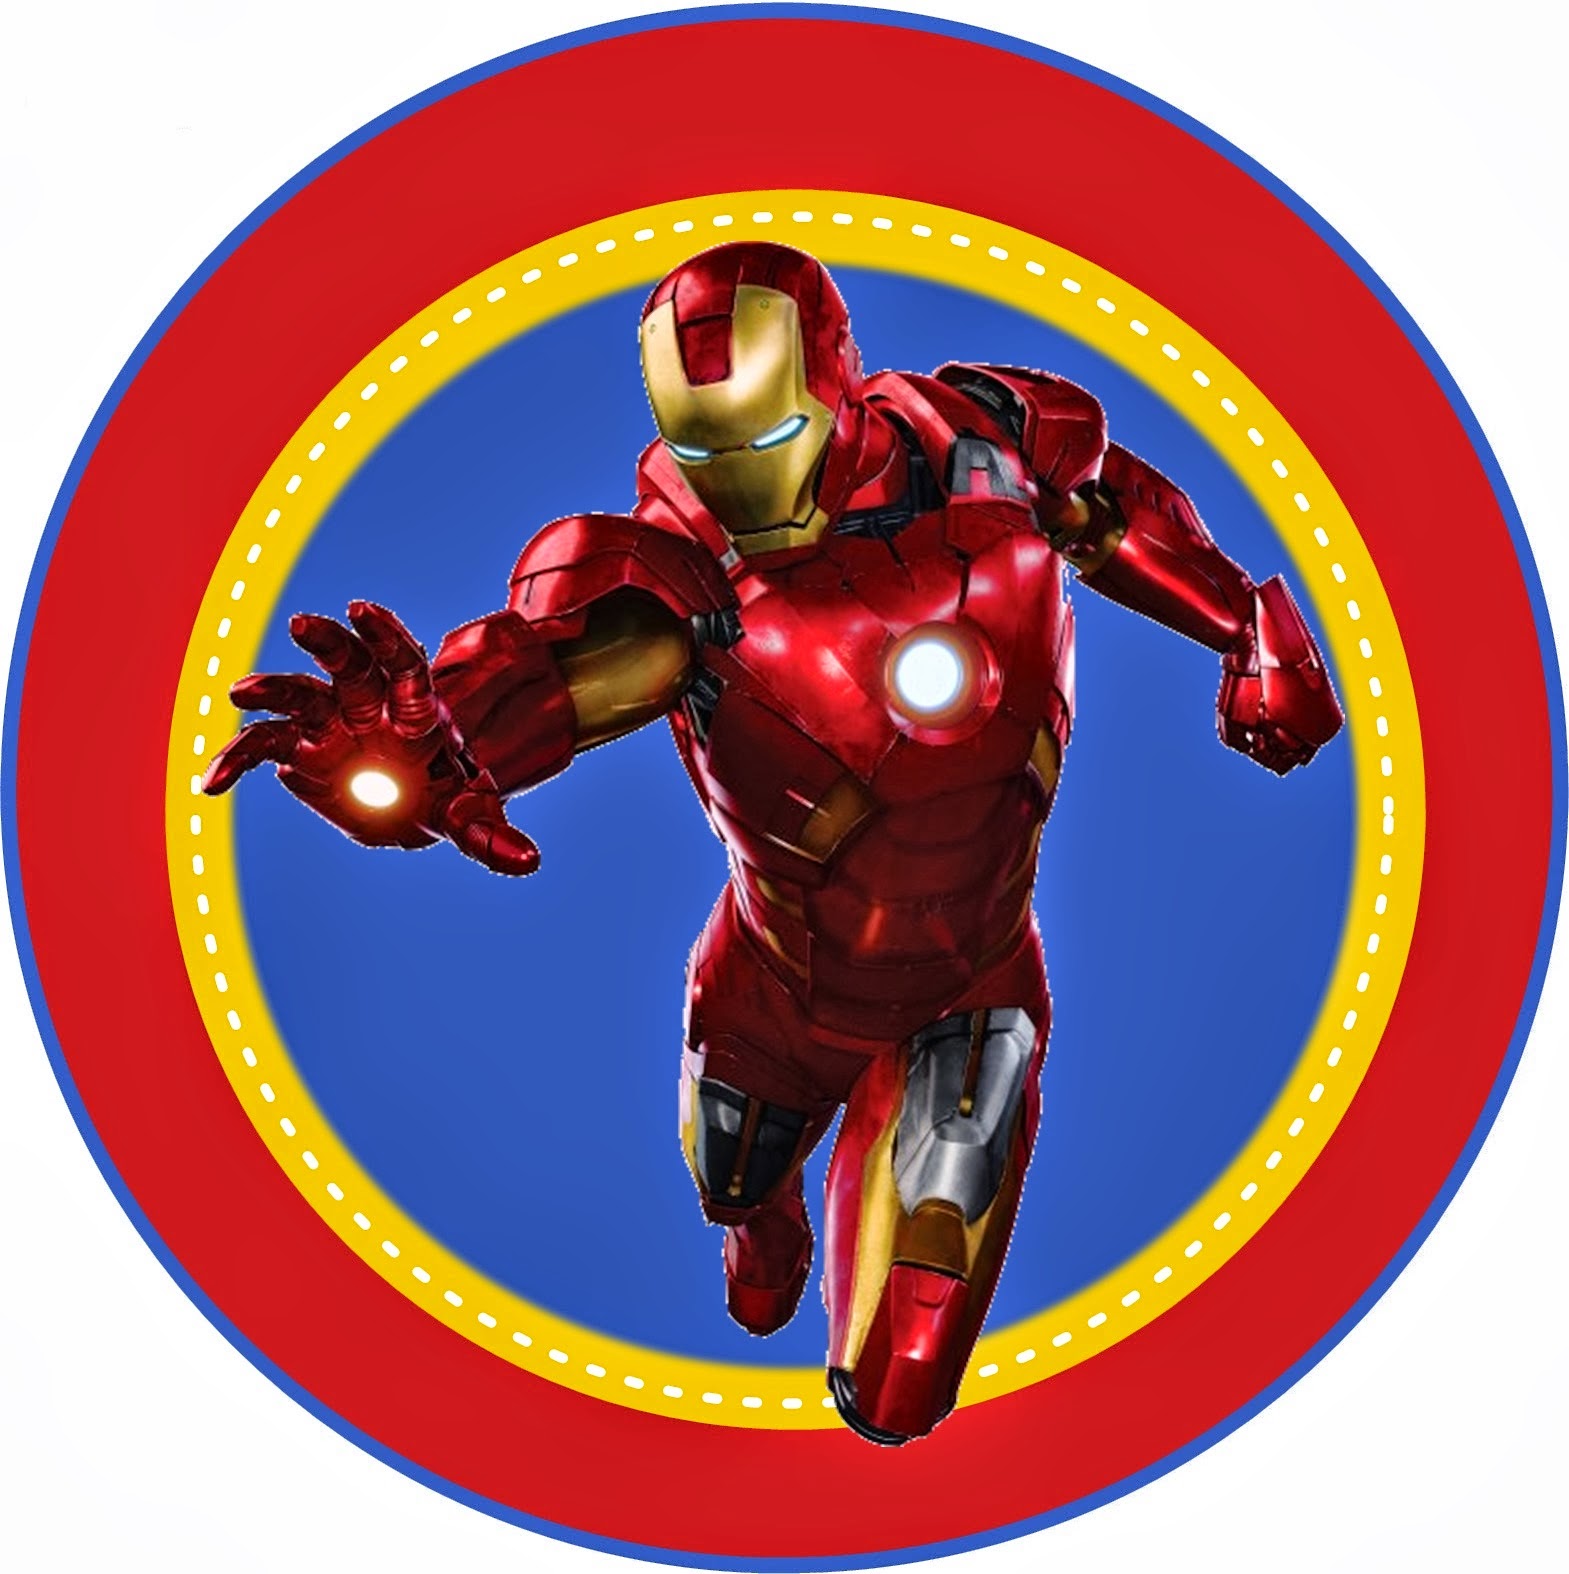 Avengers Free Printable Toppers, labels or stickers.